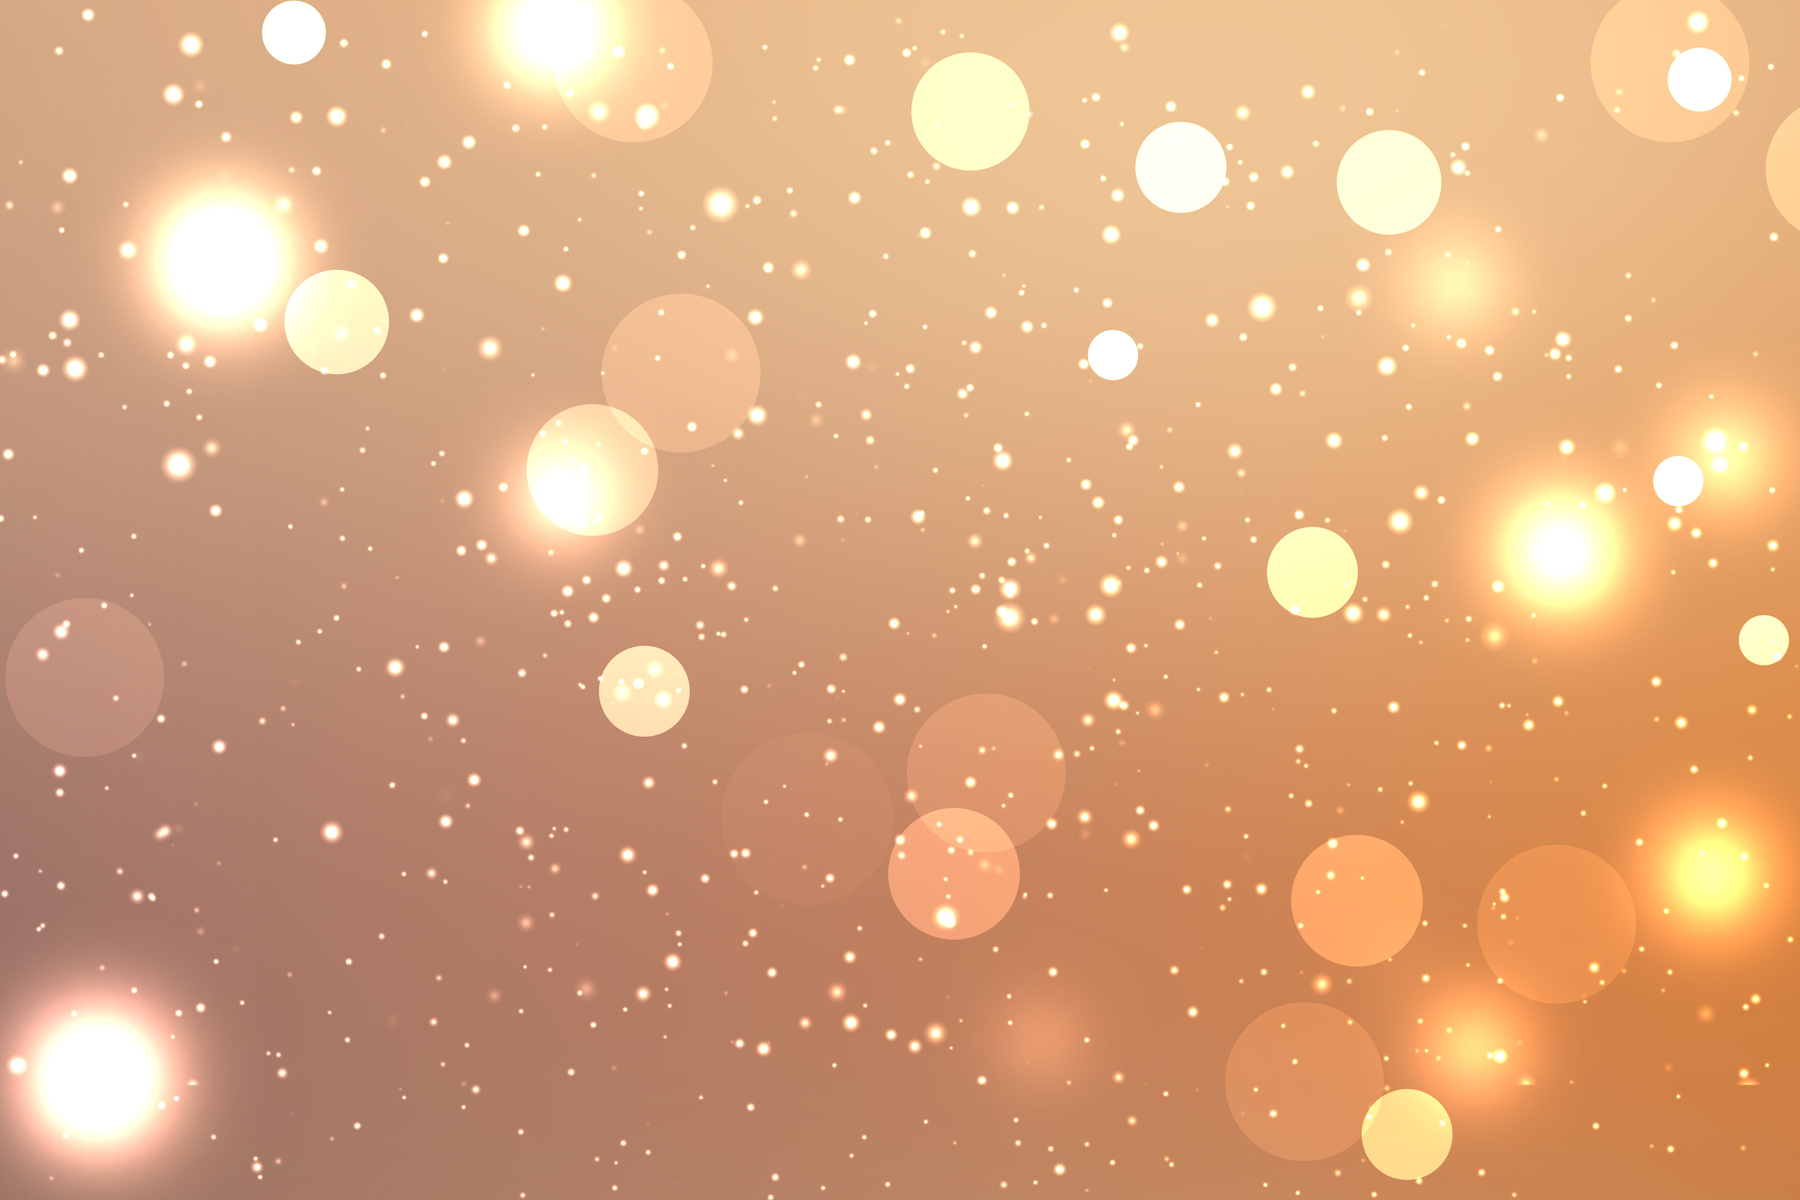 Beautiful bokeh abstract shiny light and glitter for christmas background. Abstract glitter vintage lights holiday decoration concept background.